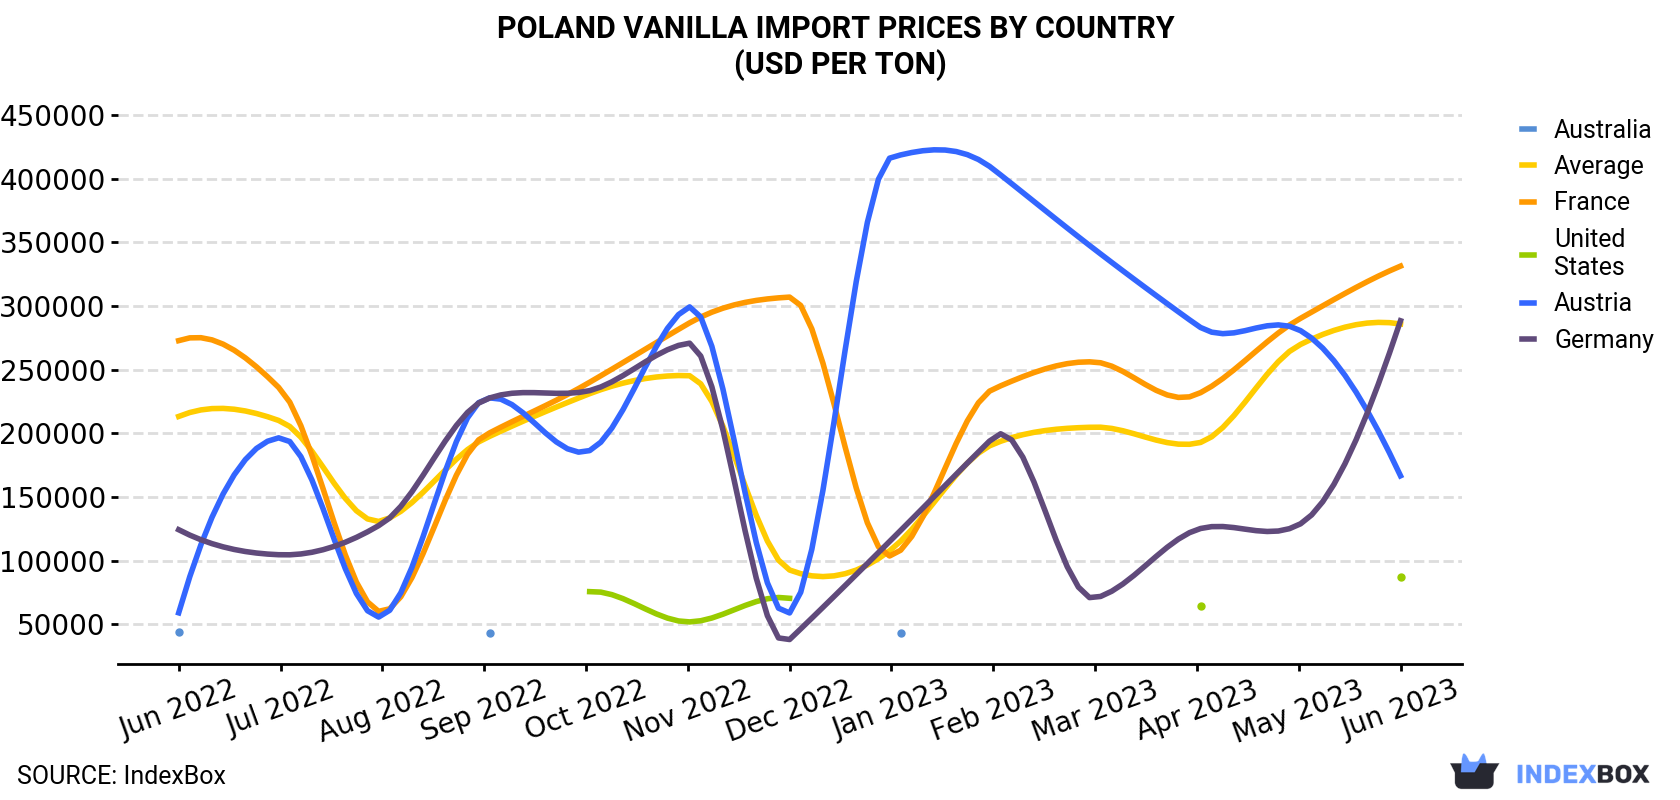 Poland Vanilla Import Prices By Country (USD Per Ton)